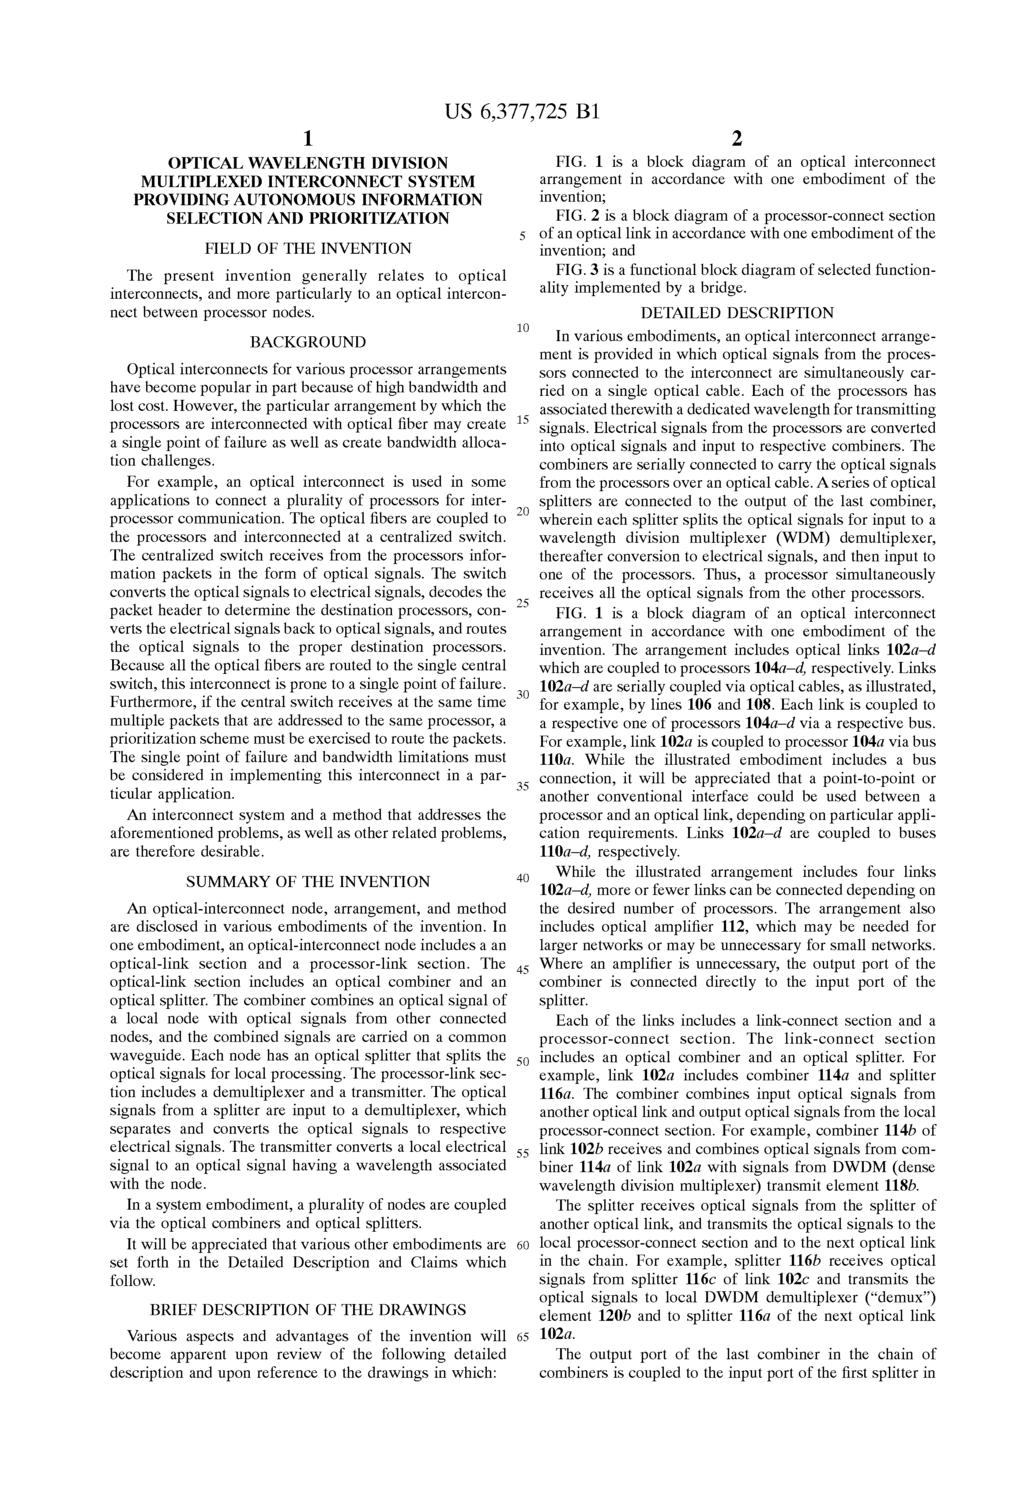 1 OPTICAL WAVELENGTH DIVISION MULTIPLEXED INTERCONNECT SYSTEM PROVIDING AUTONOMOUS INFORMATION SELECTION AND PRIORITIZATION FIELD OF THE INVENTION The present invention generally relates to optical